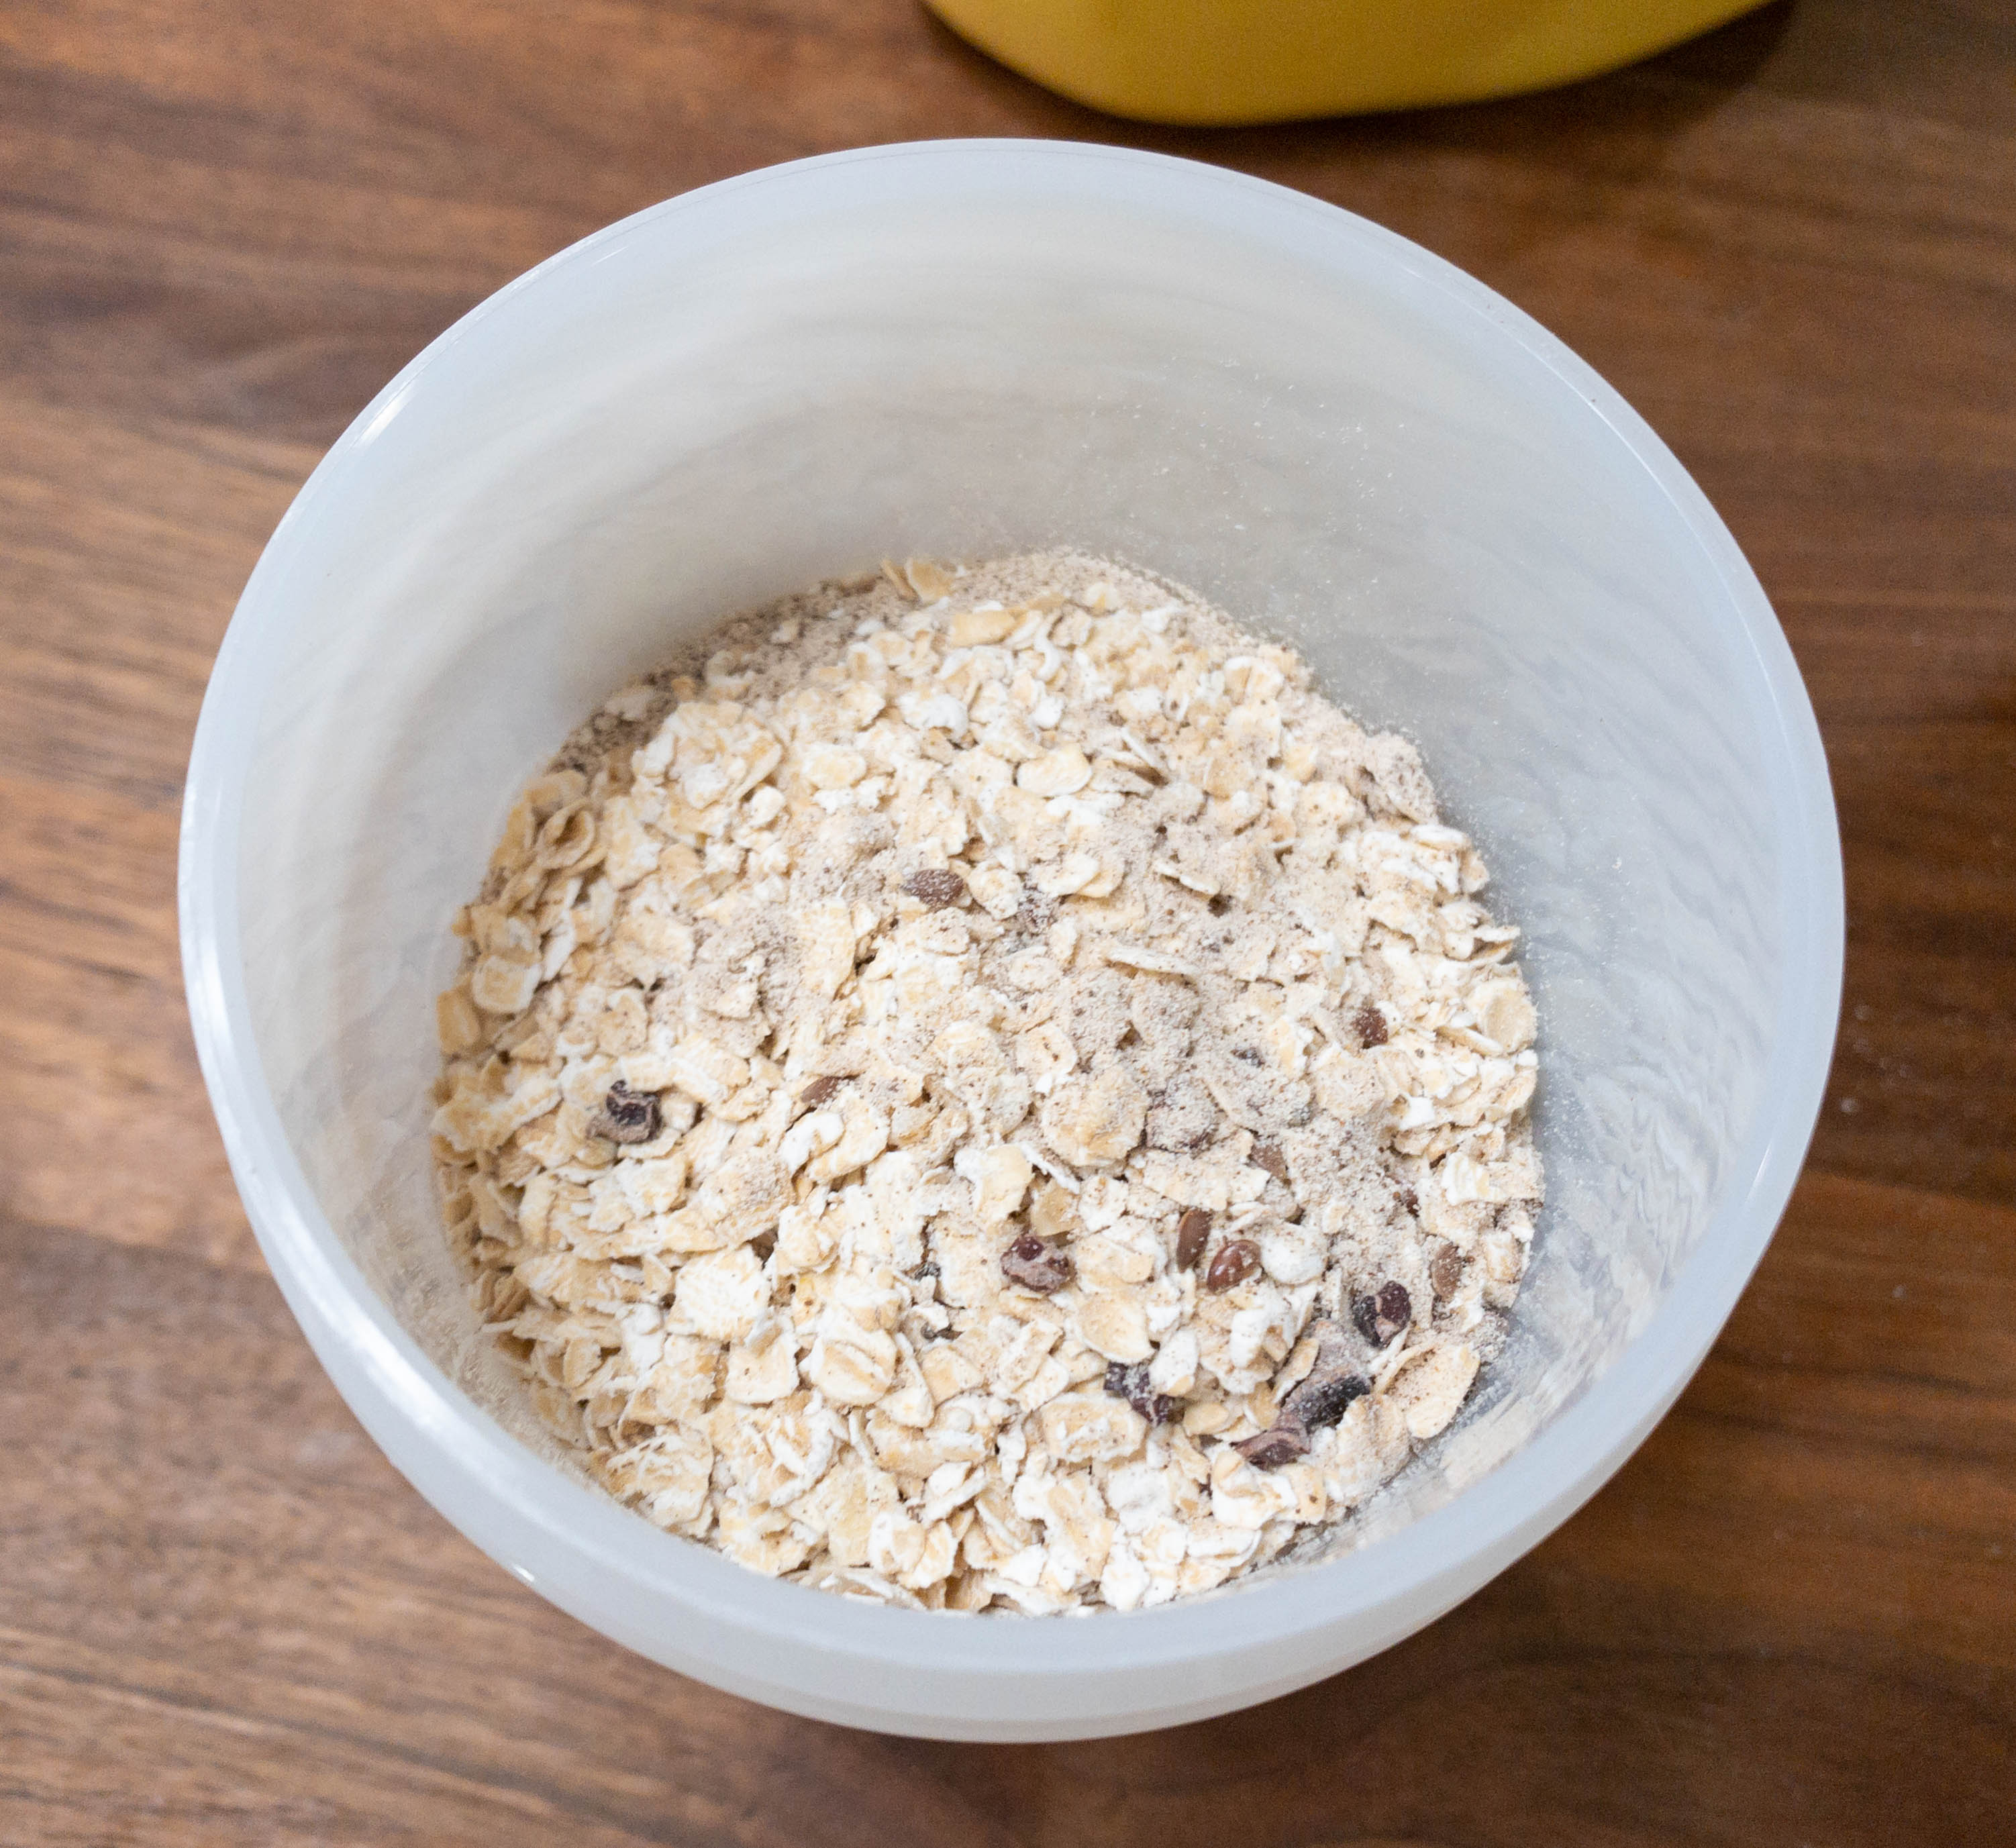 https://hellosubscription.com/wp-content/uploads/2021/05/oats-overnight-review-48.jpg?quality=90&strip=all